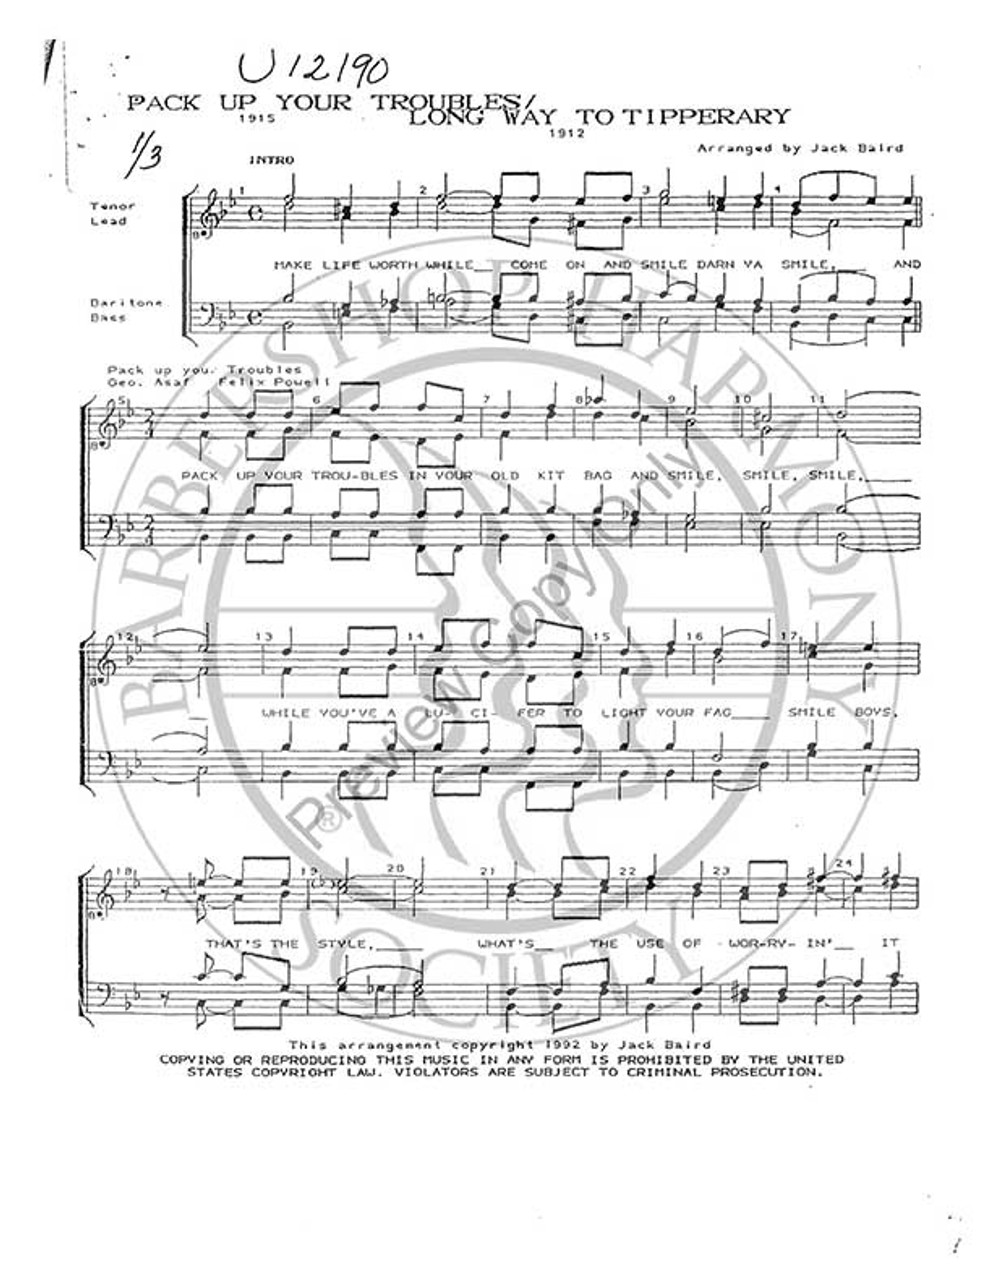 Pack Up Your Troubles/Long Way To Tipperary Medley (TTBB) (arr. Jack Baird)-Download-UNPUB